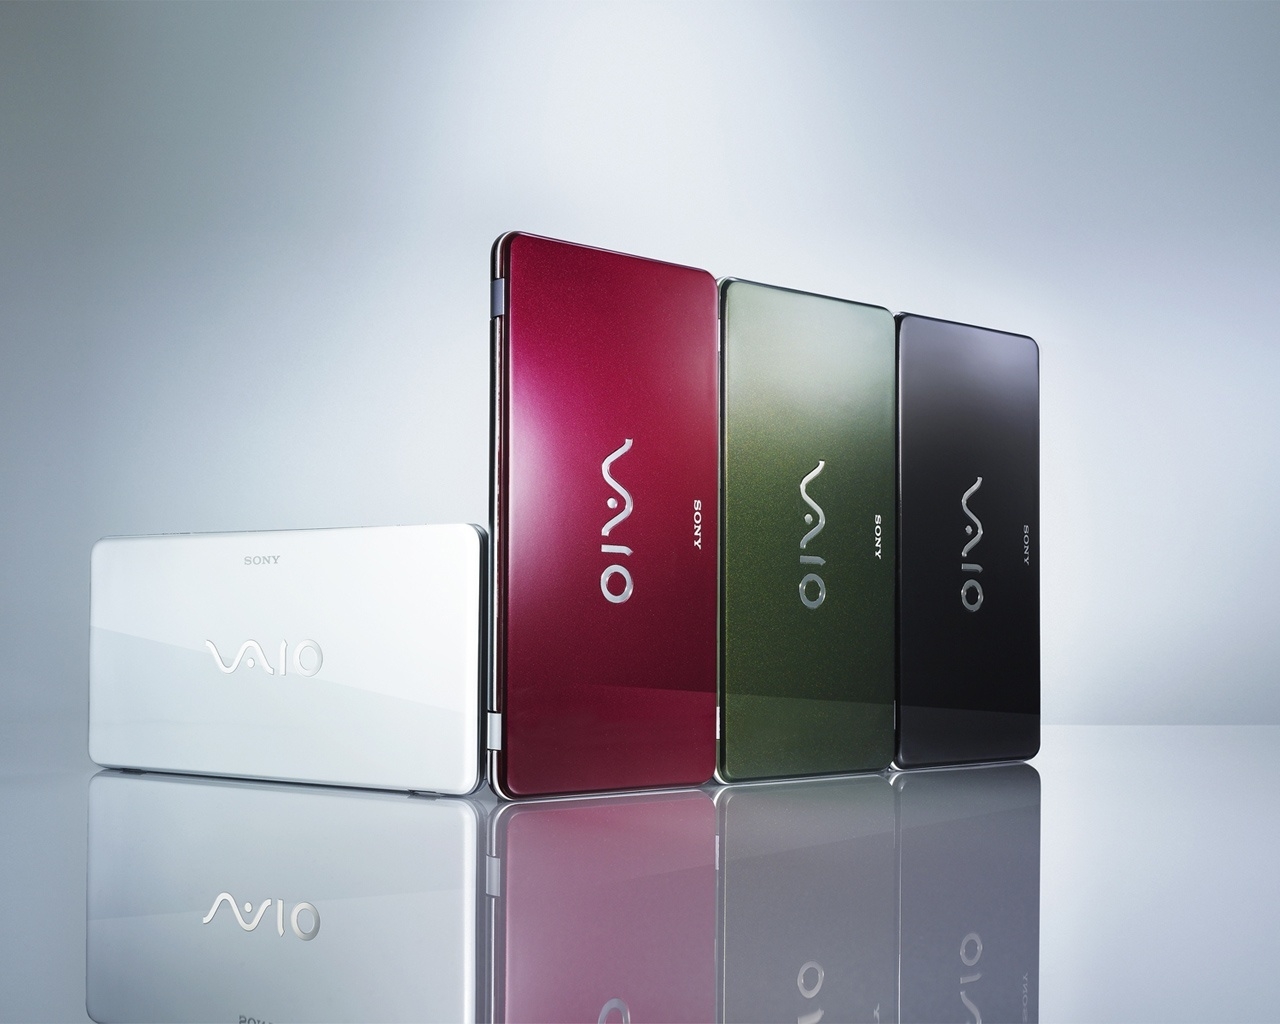 Sony Vaio 4 colors for 1280 x 1024 resolution